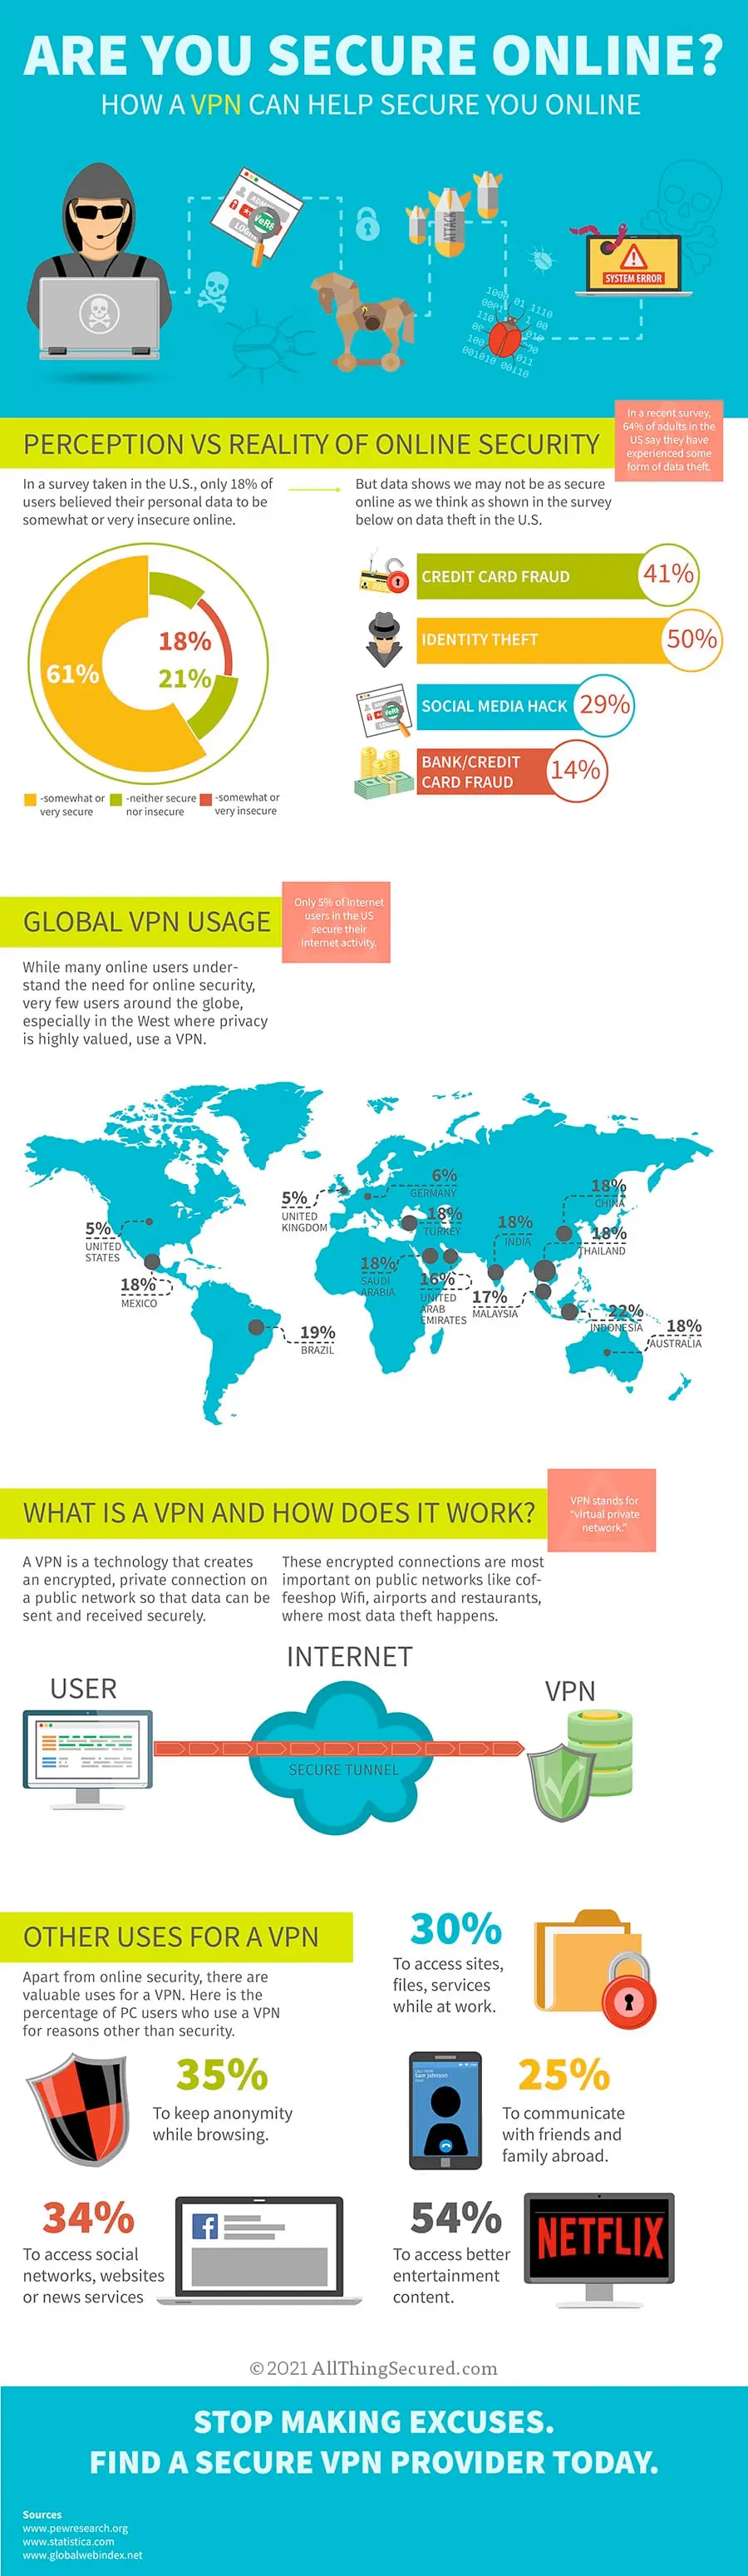 Are you secure online? How a VPN can help keep you safe. (infographic)